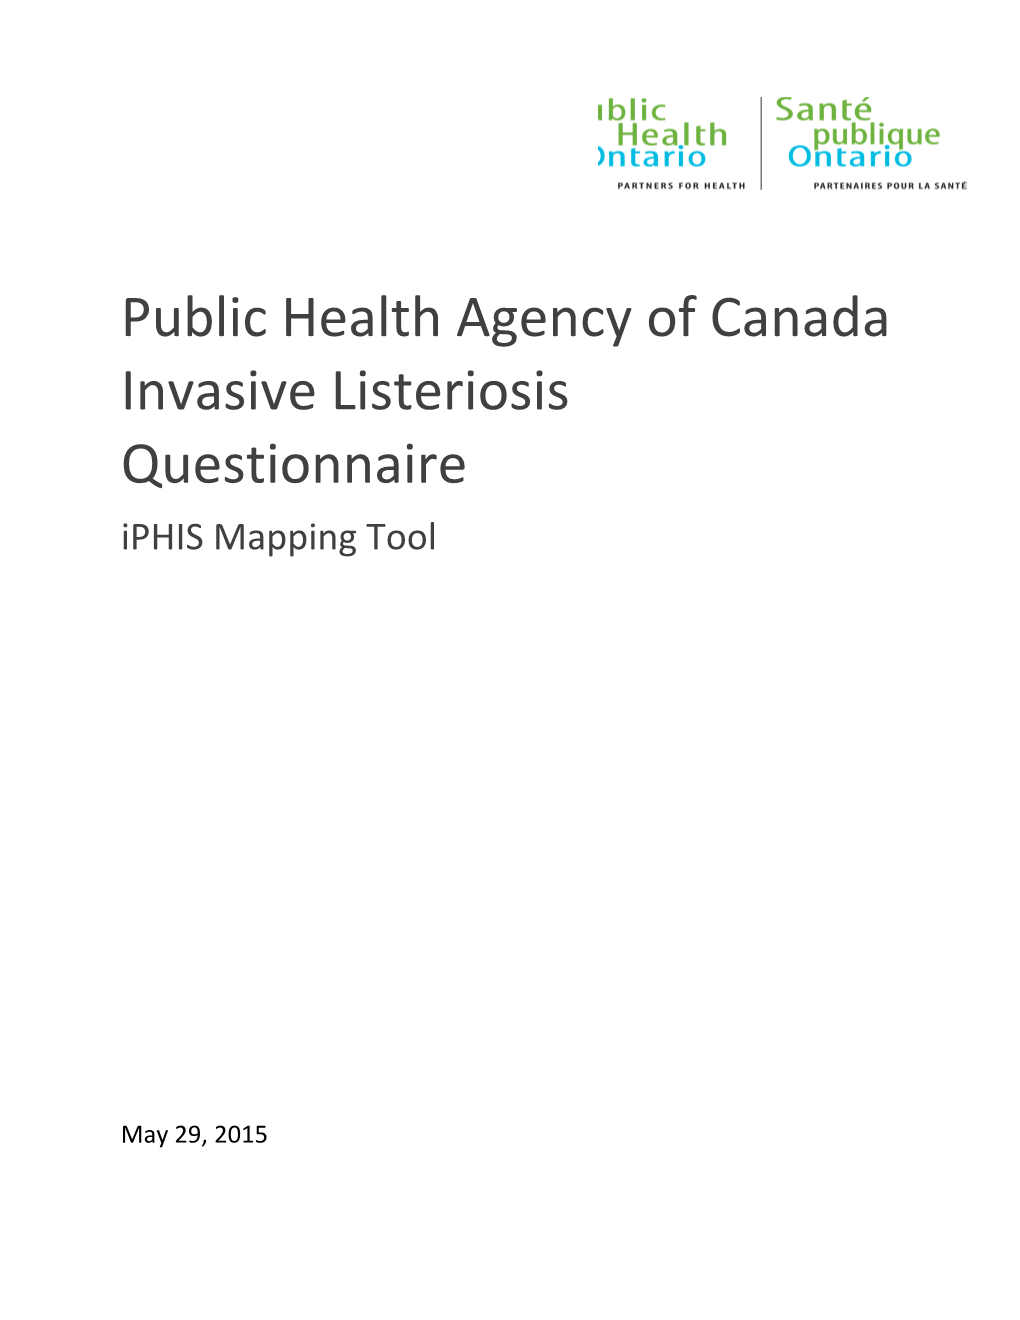 PHAC Invasivelisteriosis Questionnaire: Iphis Mapping Tool May 29, 2015